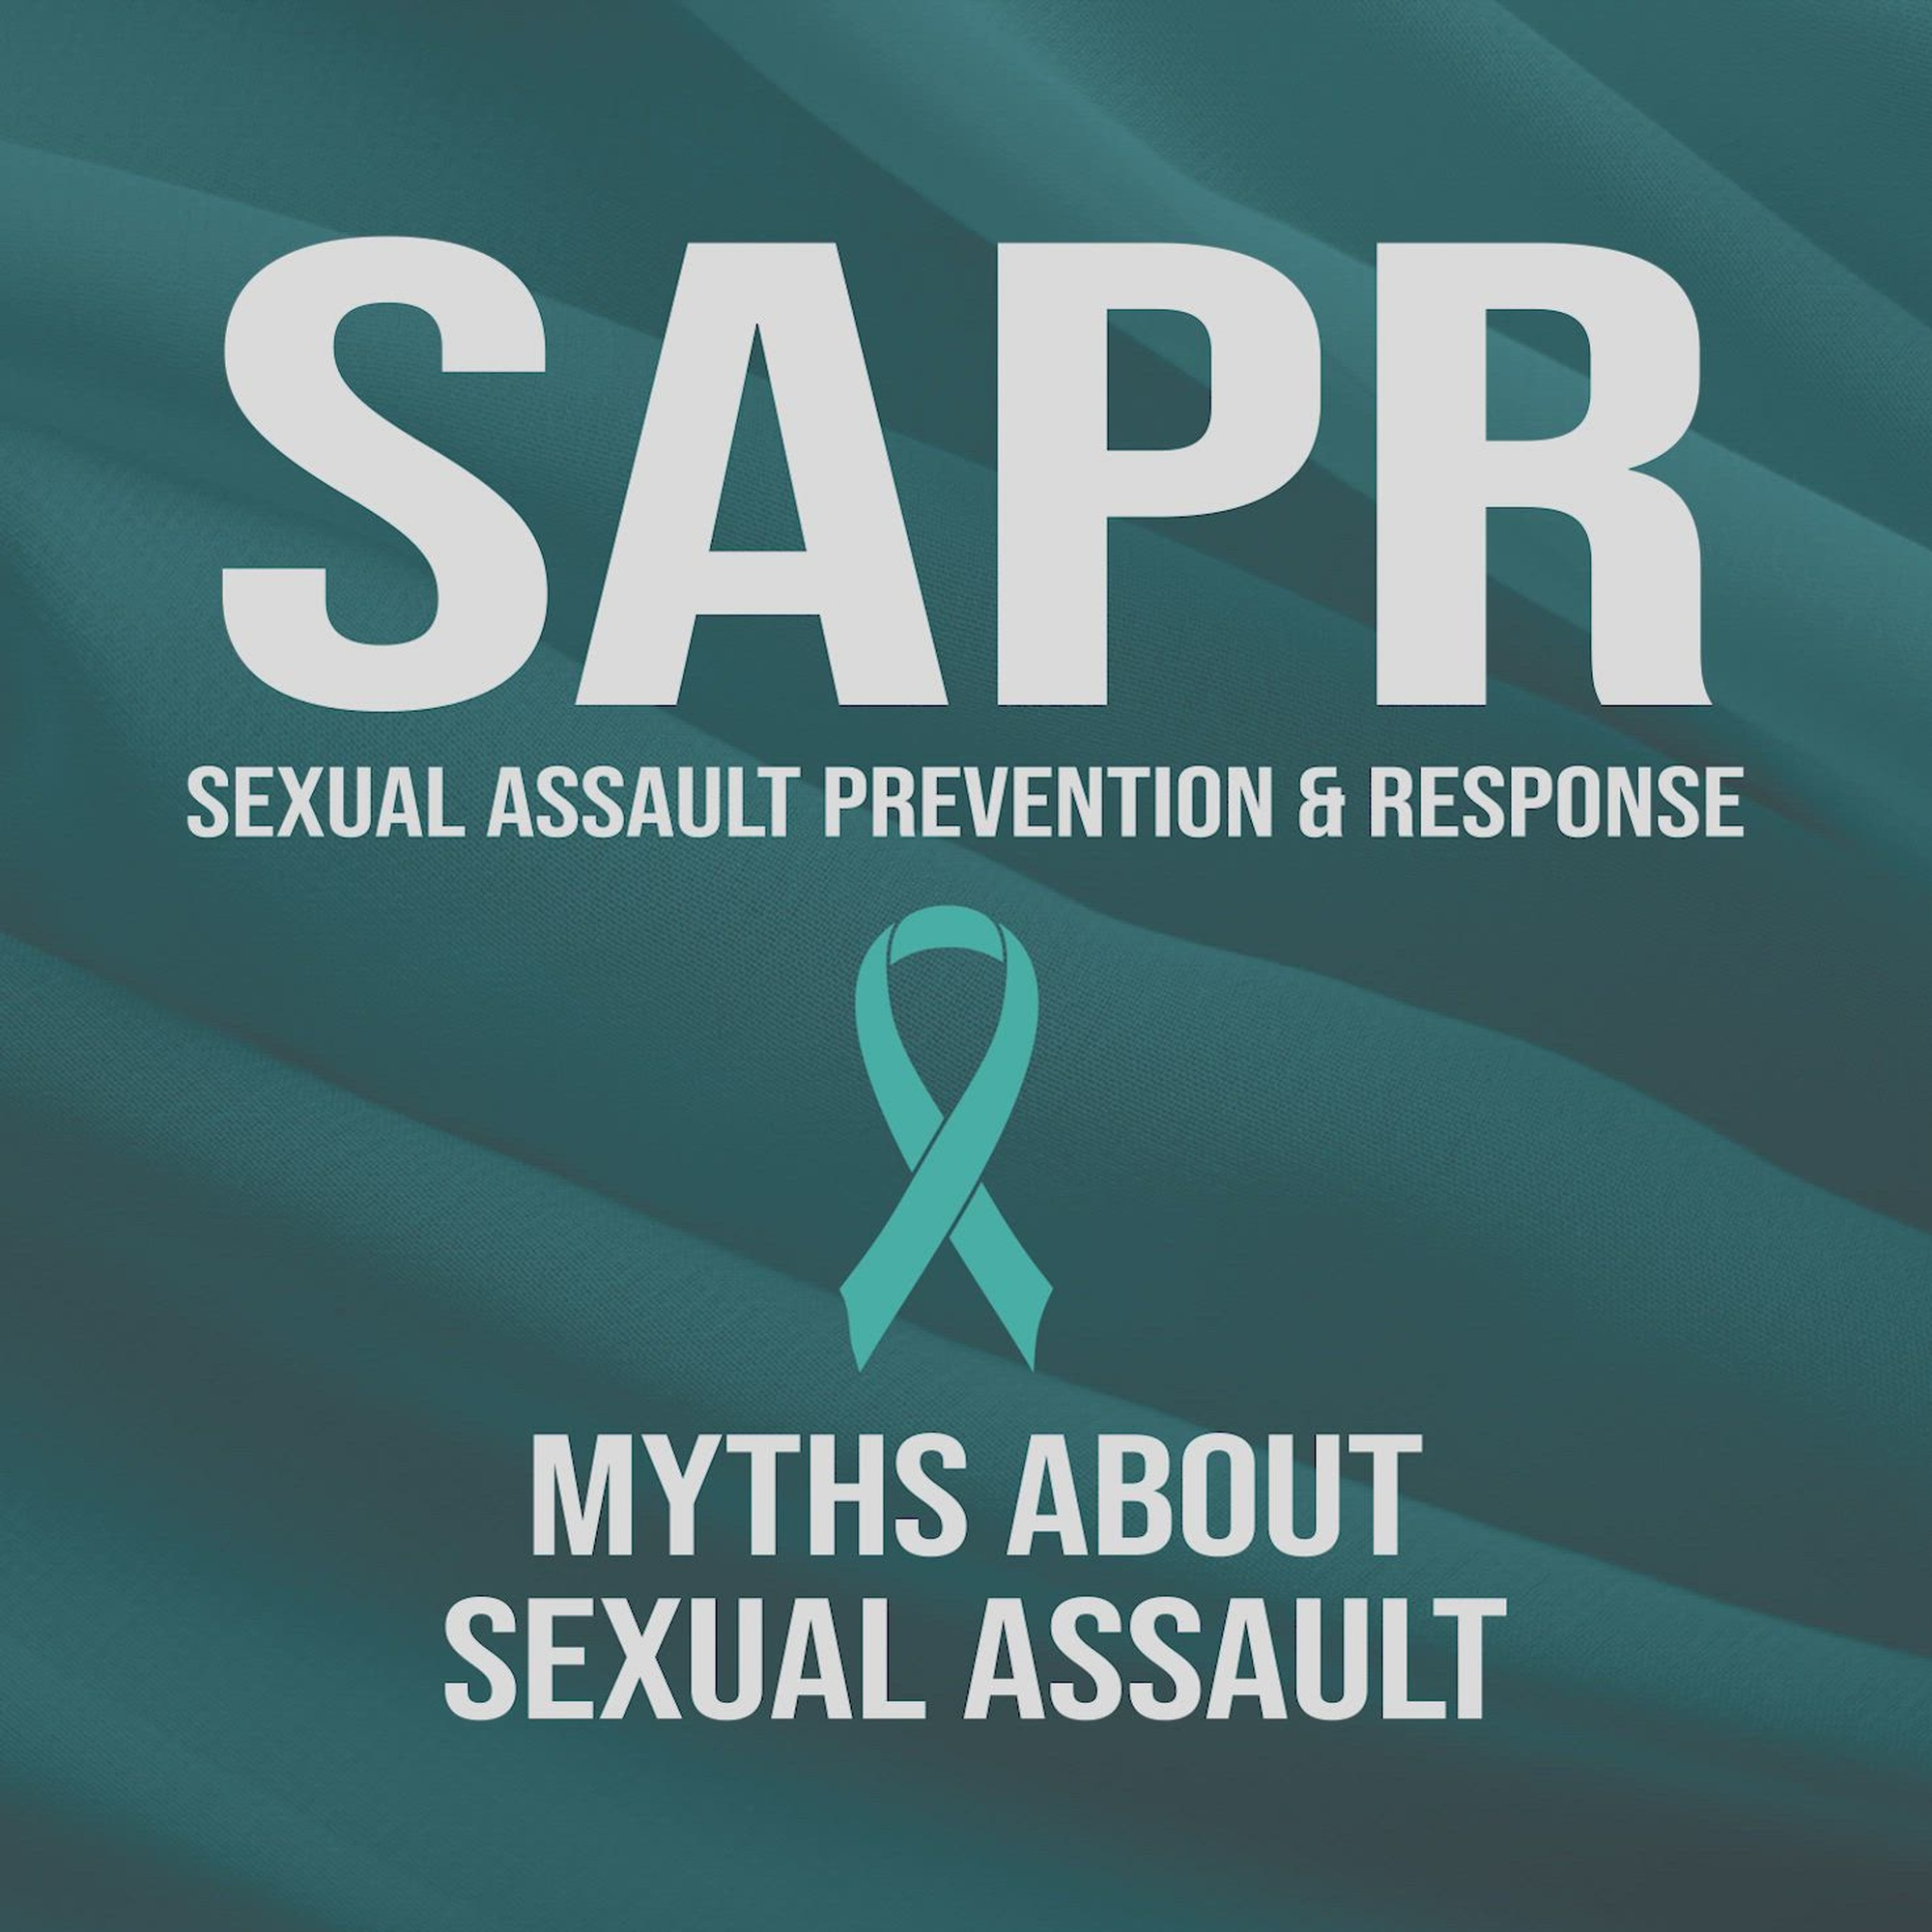 The animation shows myths about sexual assault that prevent proper reporting, and states the facts accordingly. This motion graphic was created on June 9, 2022, at Communication Strategy and Operations, Marine Corps Installations West, Marine Corps Base Camp Pendleton. The animation is a product in support of Marine Corps Base Camp Pendleton’s initiative to inform Marines about myths keeping victims and bystanders from properly reporting or preventing sexual assault. (U.S. Marine Corps motion graphic created by Pfc. Alicia Childs)